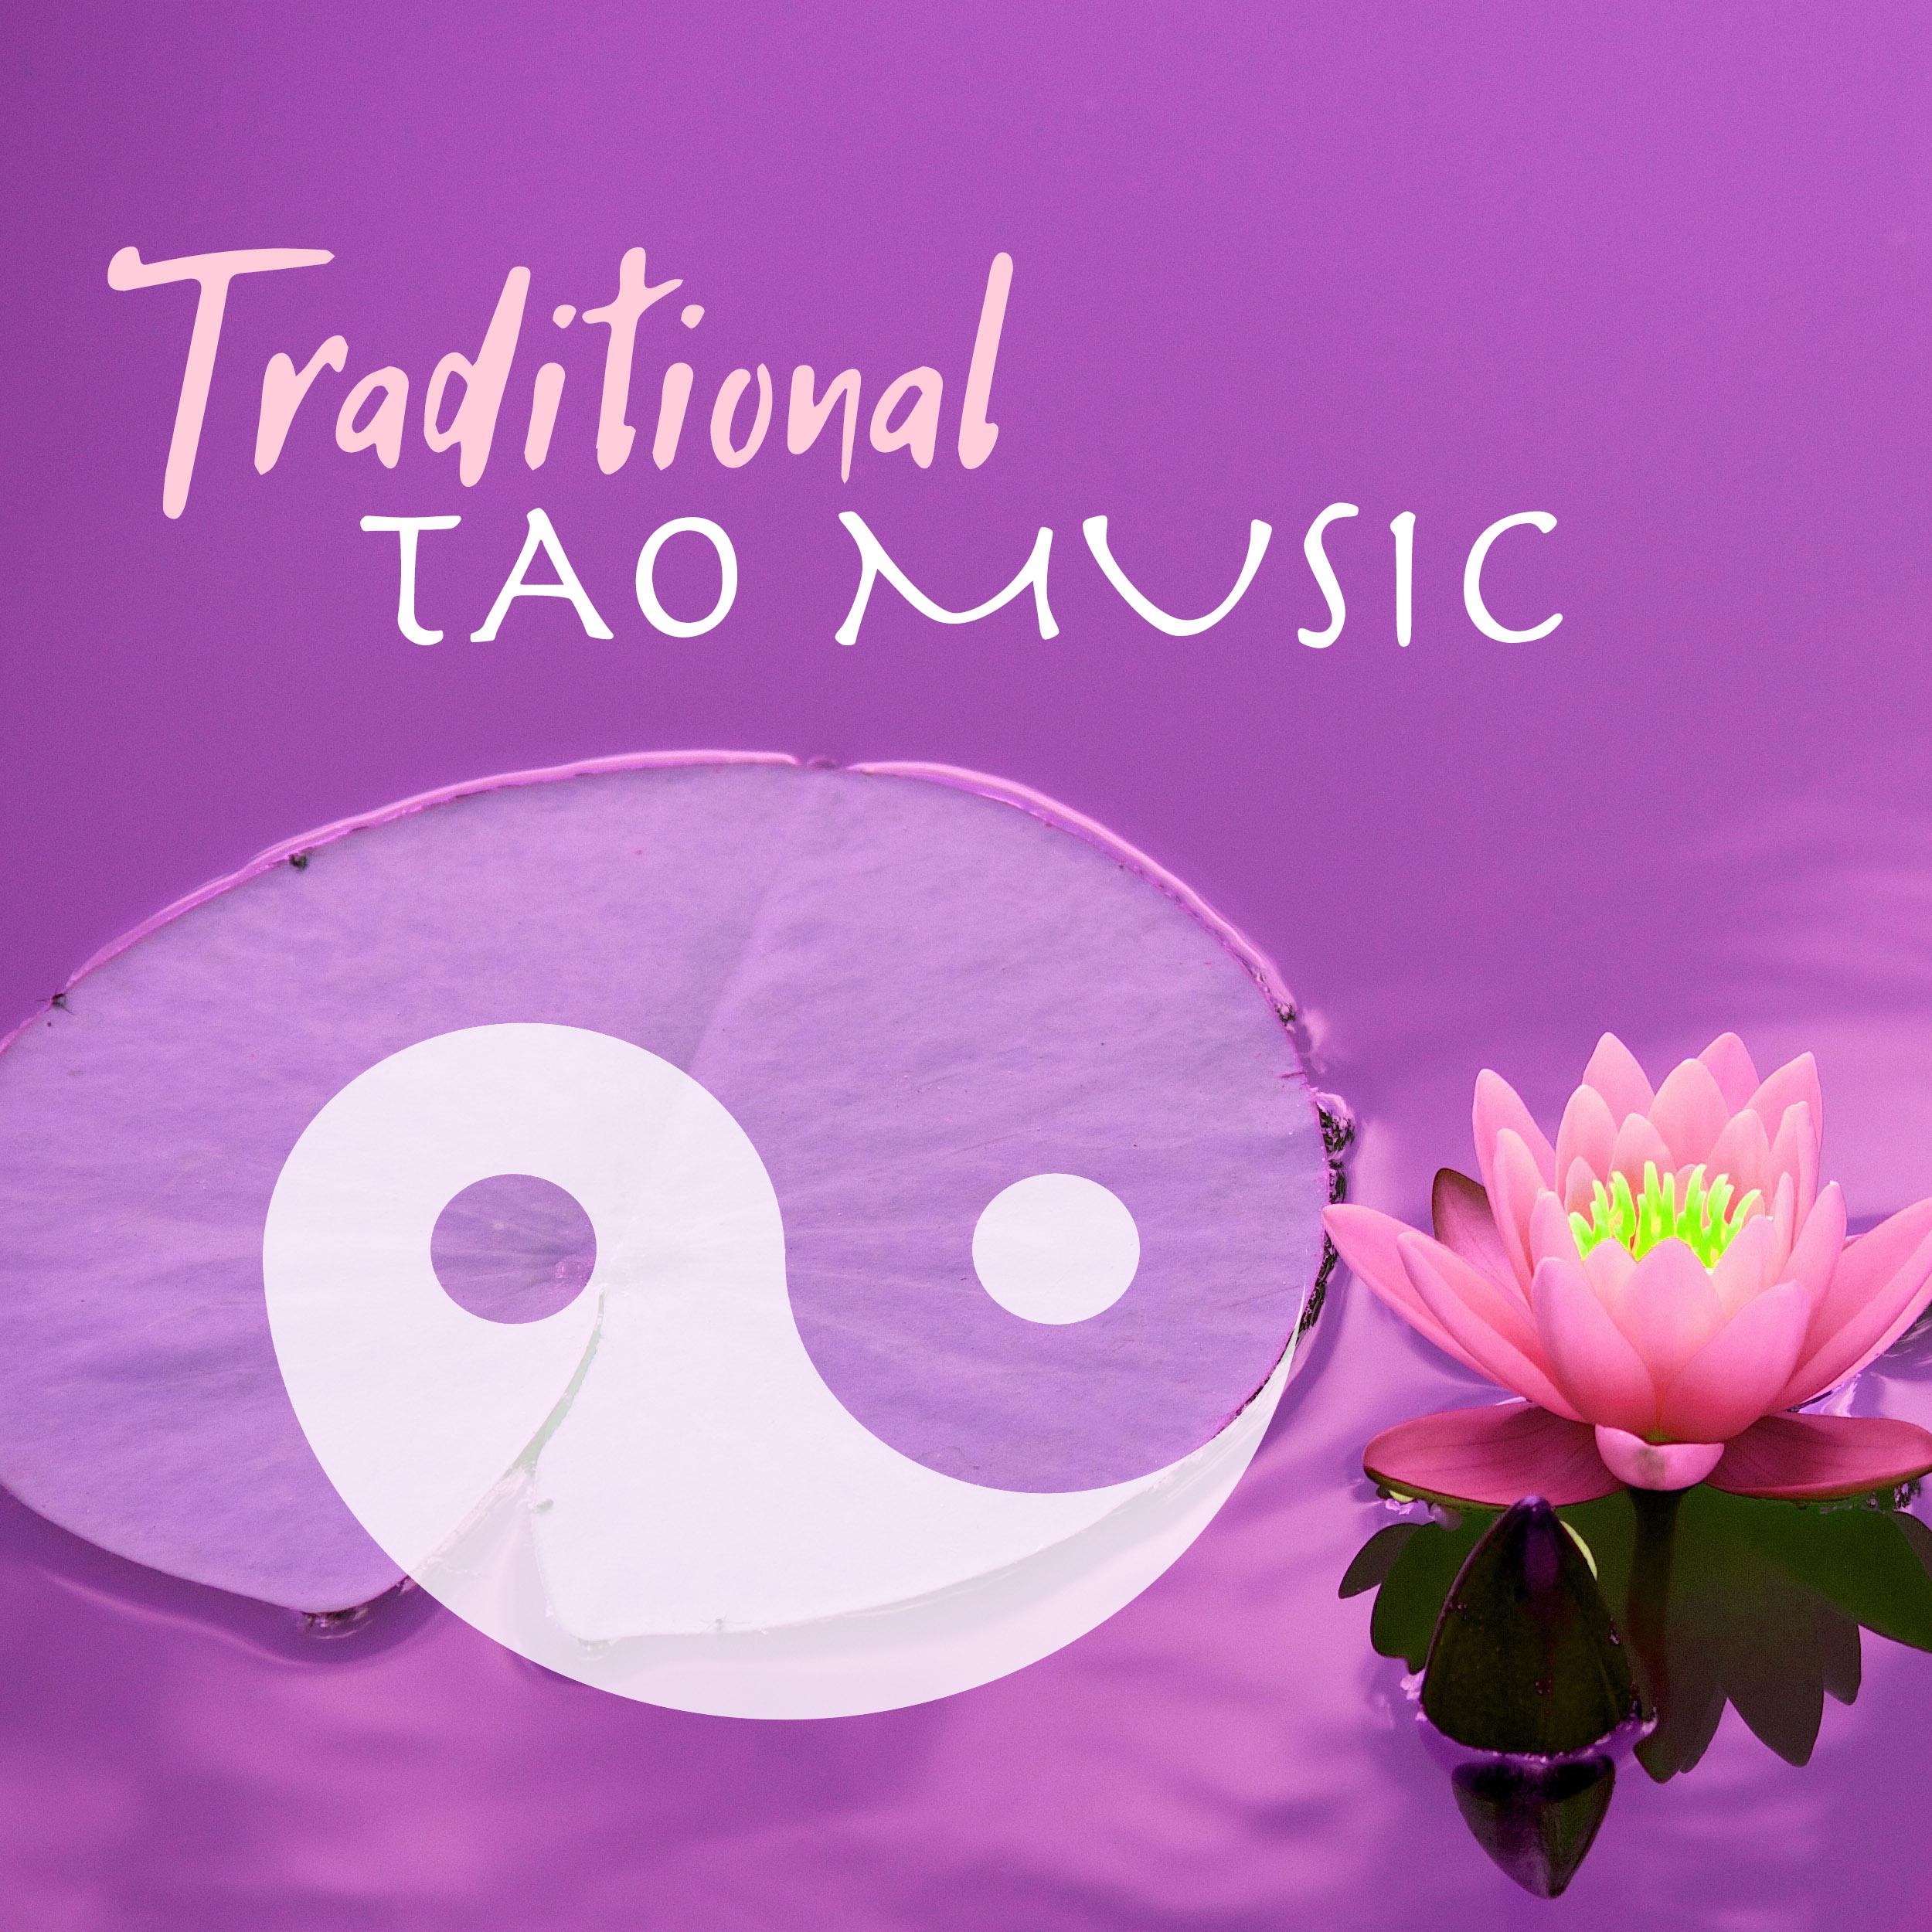 Traditional Tao Music - Songs for Relaxation & Meditation, Best Spiritual Healing Background Tracks for Massage & Spa